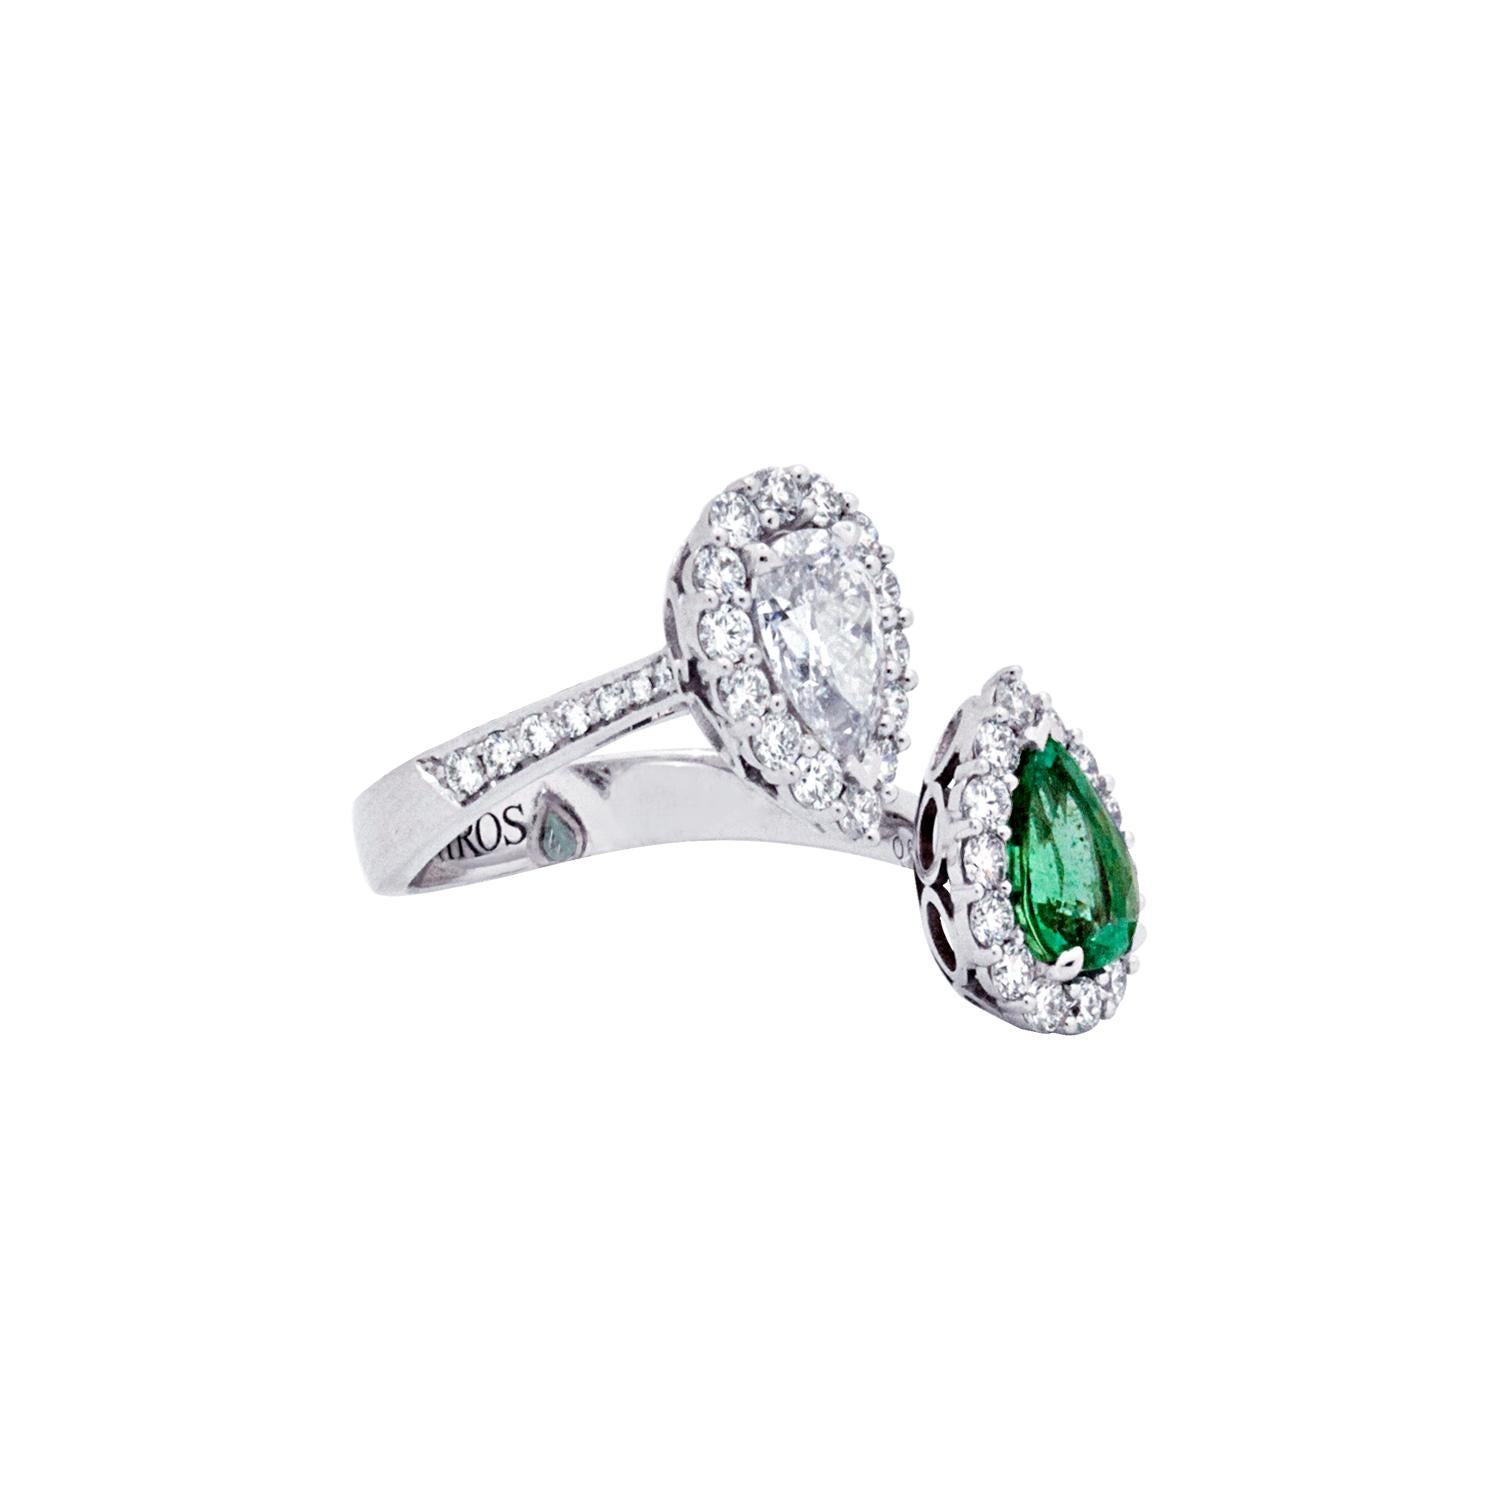 Pear Cut 18 Karat White Gold Ring with Brilliant cut White Diamonds and Emerald For Sale